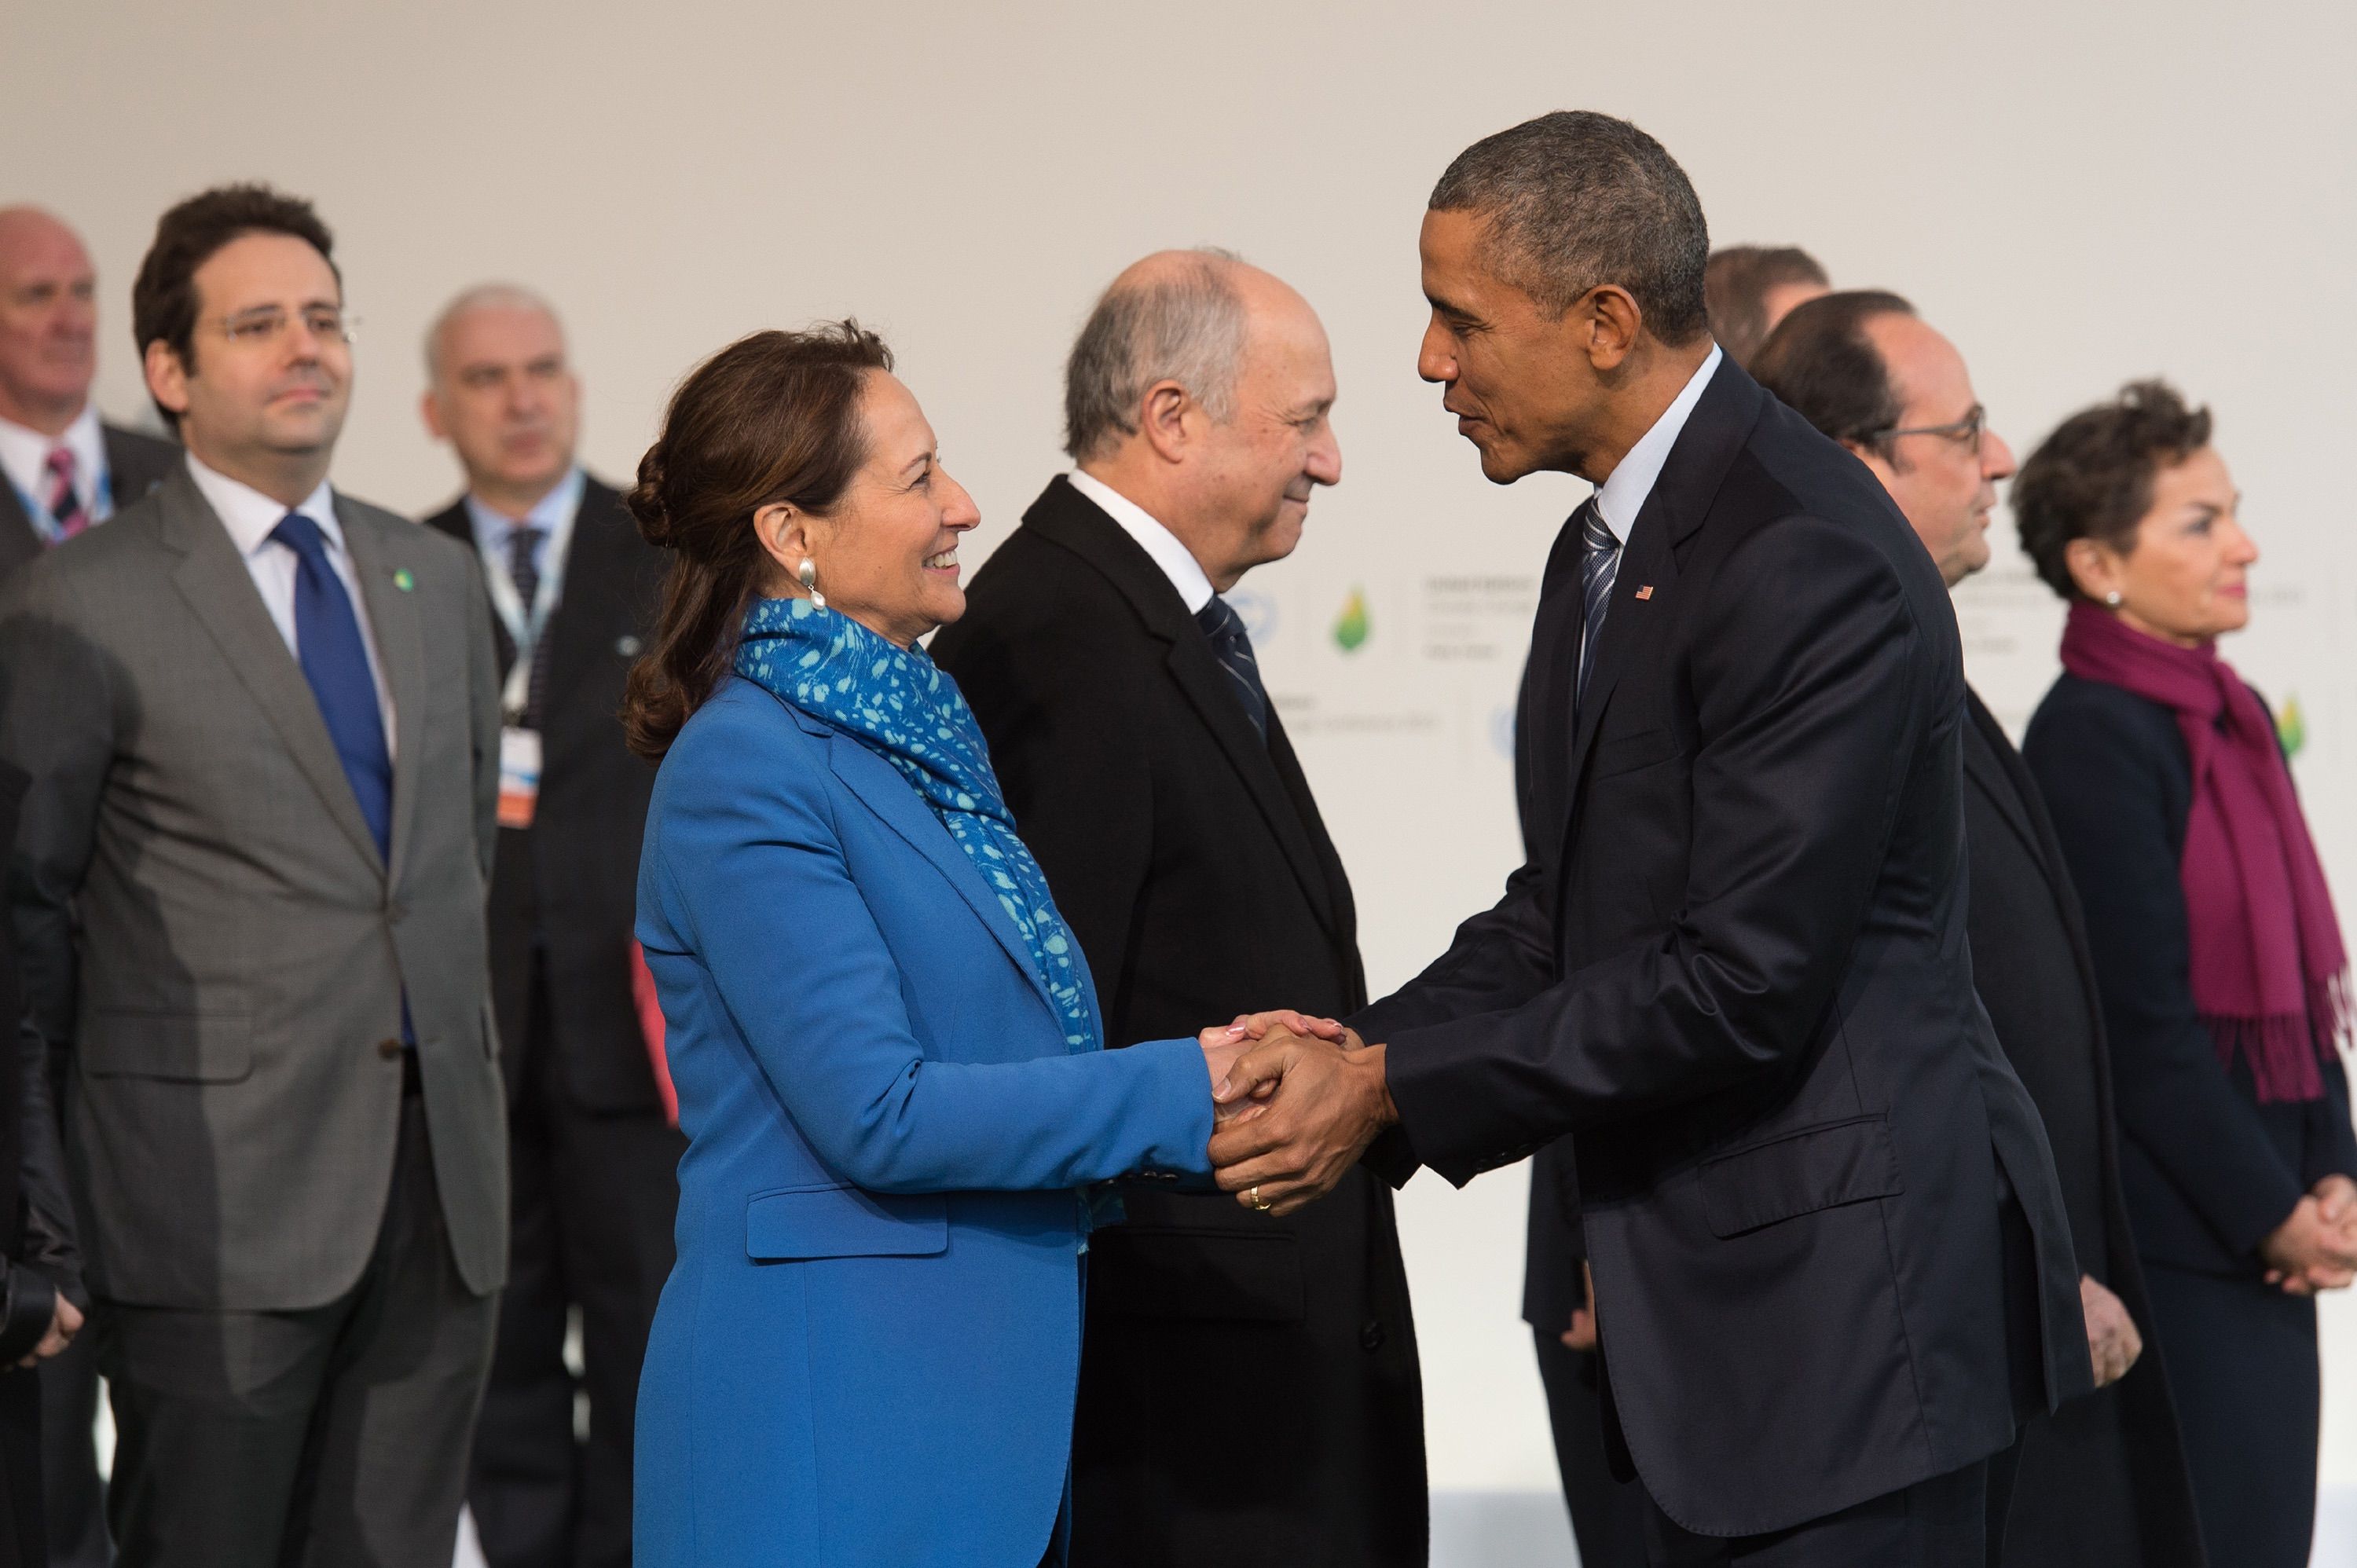 French Minister for Ecology, Sustainable Development and Energy, Segolene Royal shakes hands with U.S. President Barack Obama during the official opening of the COP21 UN Conference on Climate Change on Nov. 30, 2015 held at Le Bourget, near Paris, France. (Pierre Villard/Abaca Press/TNS)